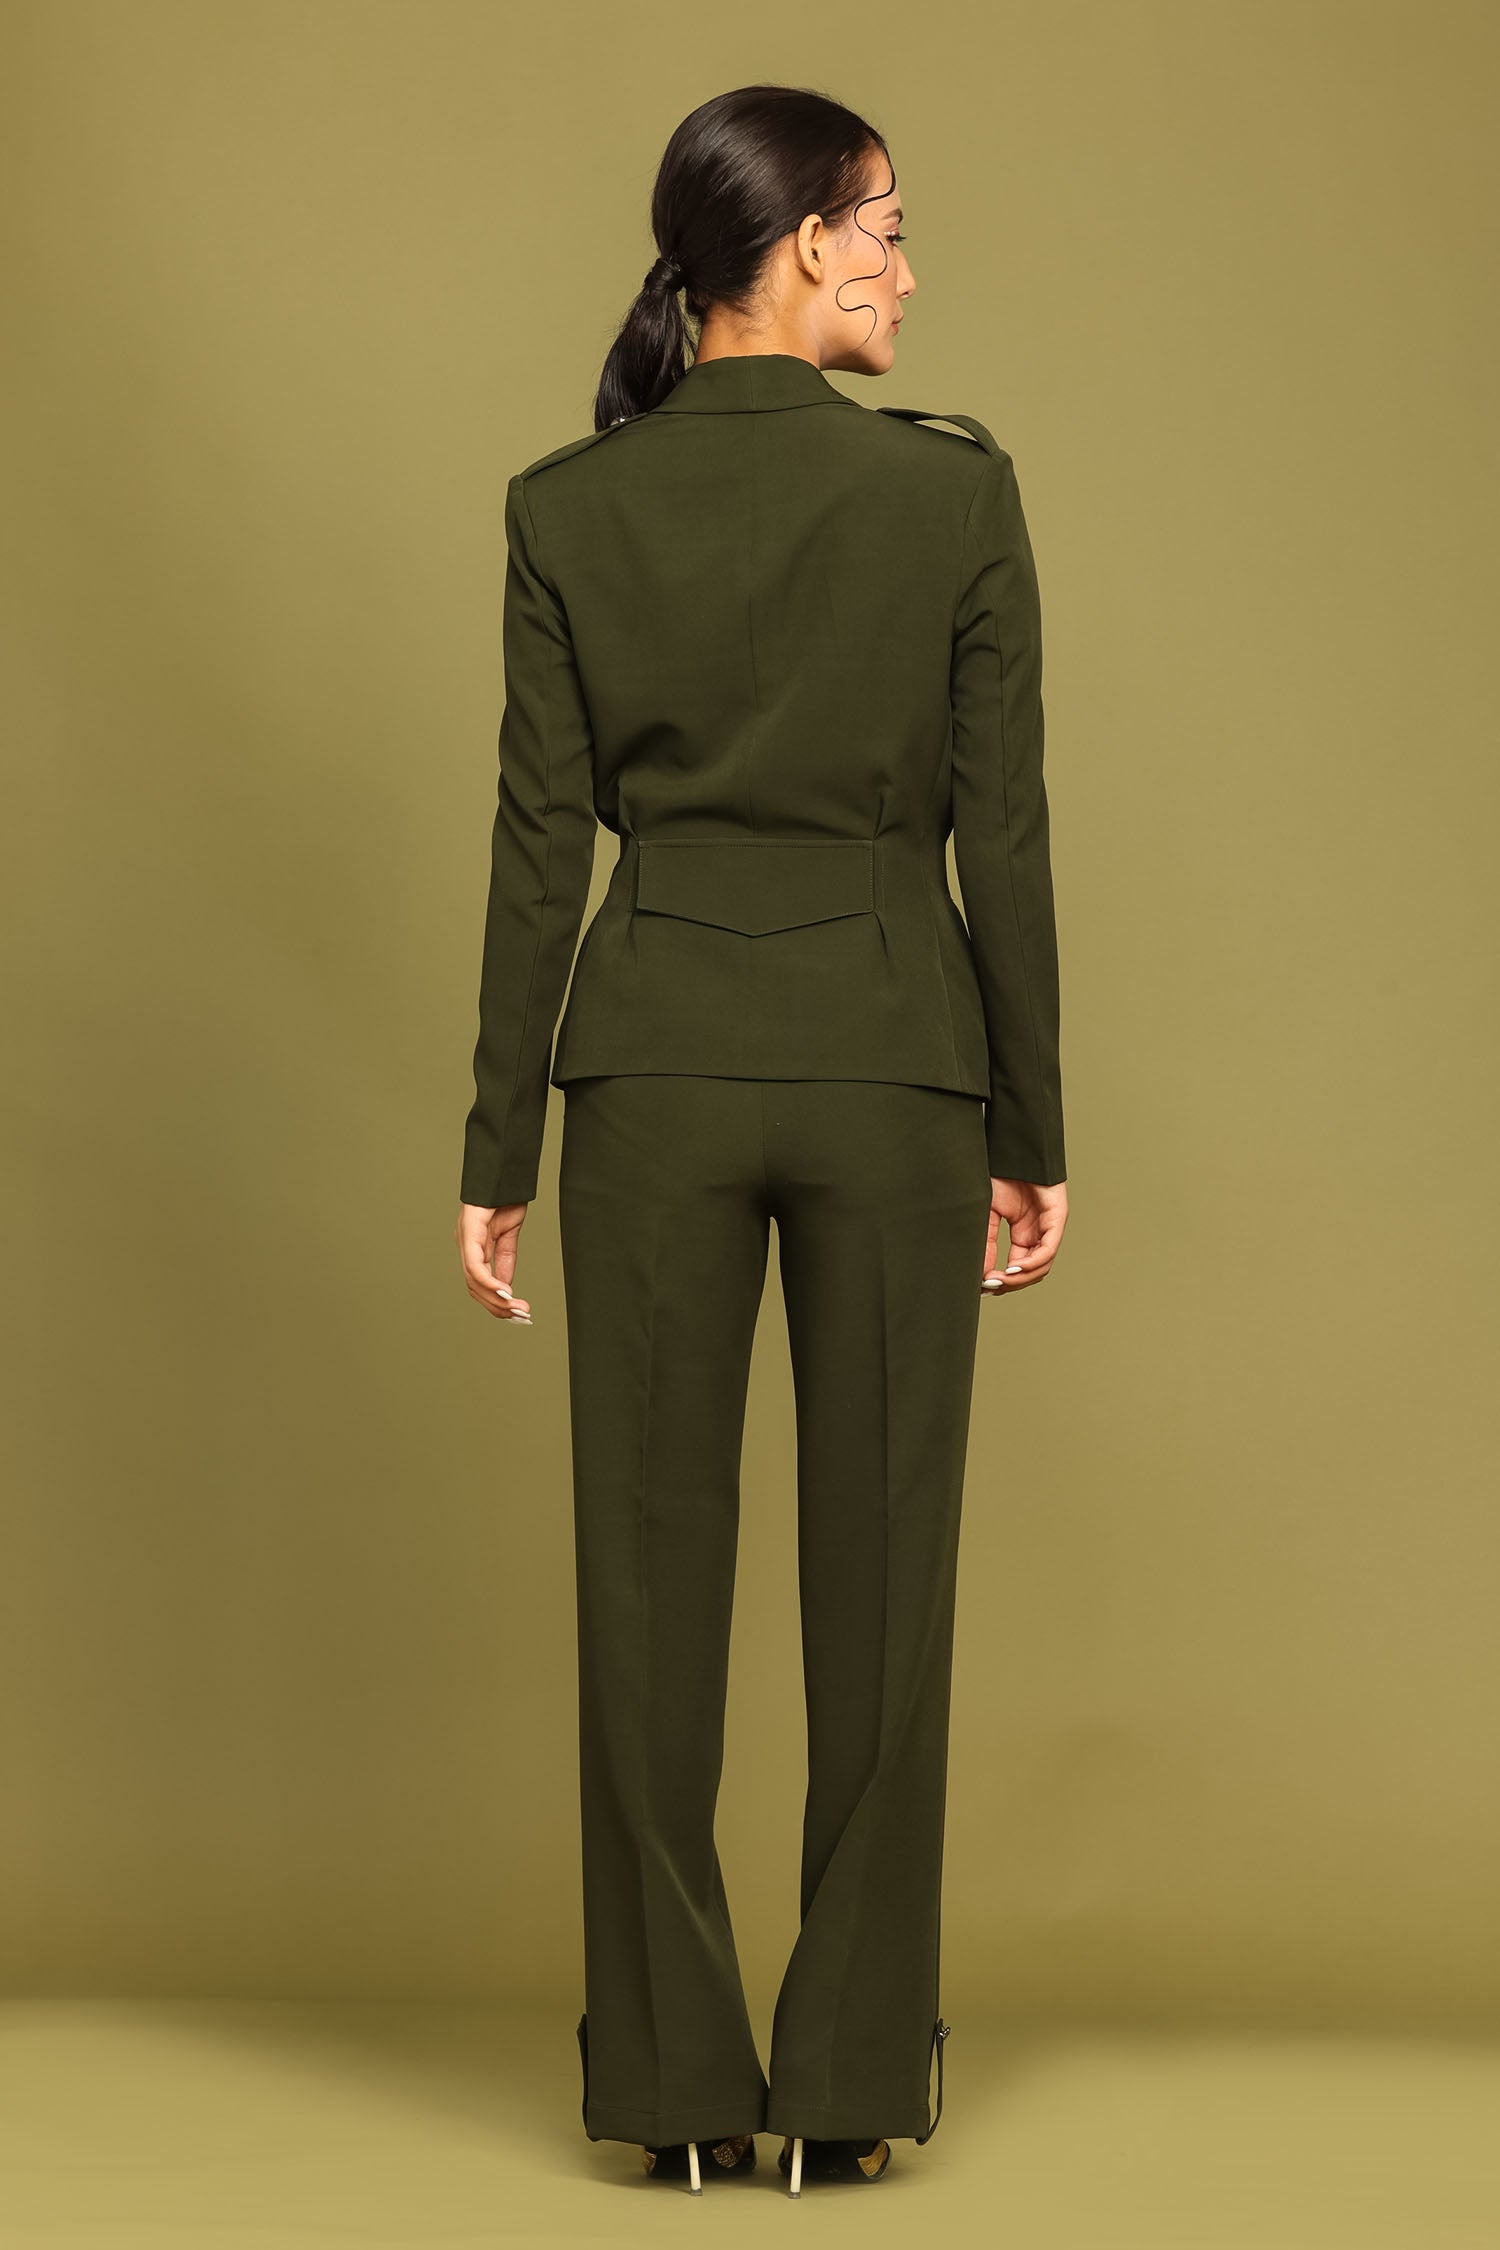 Box Pleated Juniper Green Blazer With Trousers